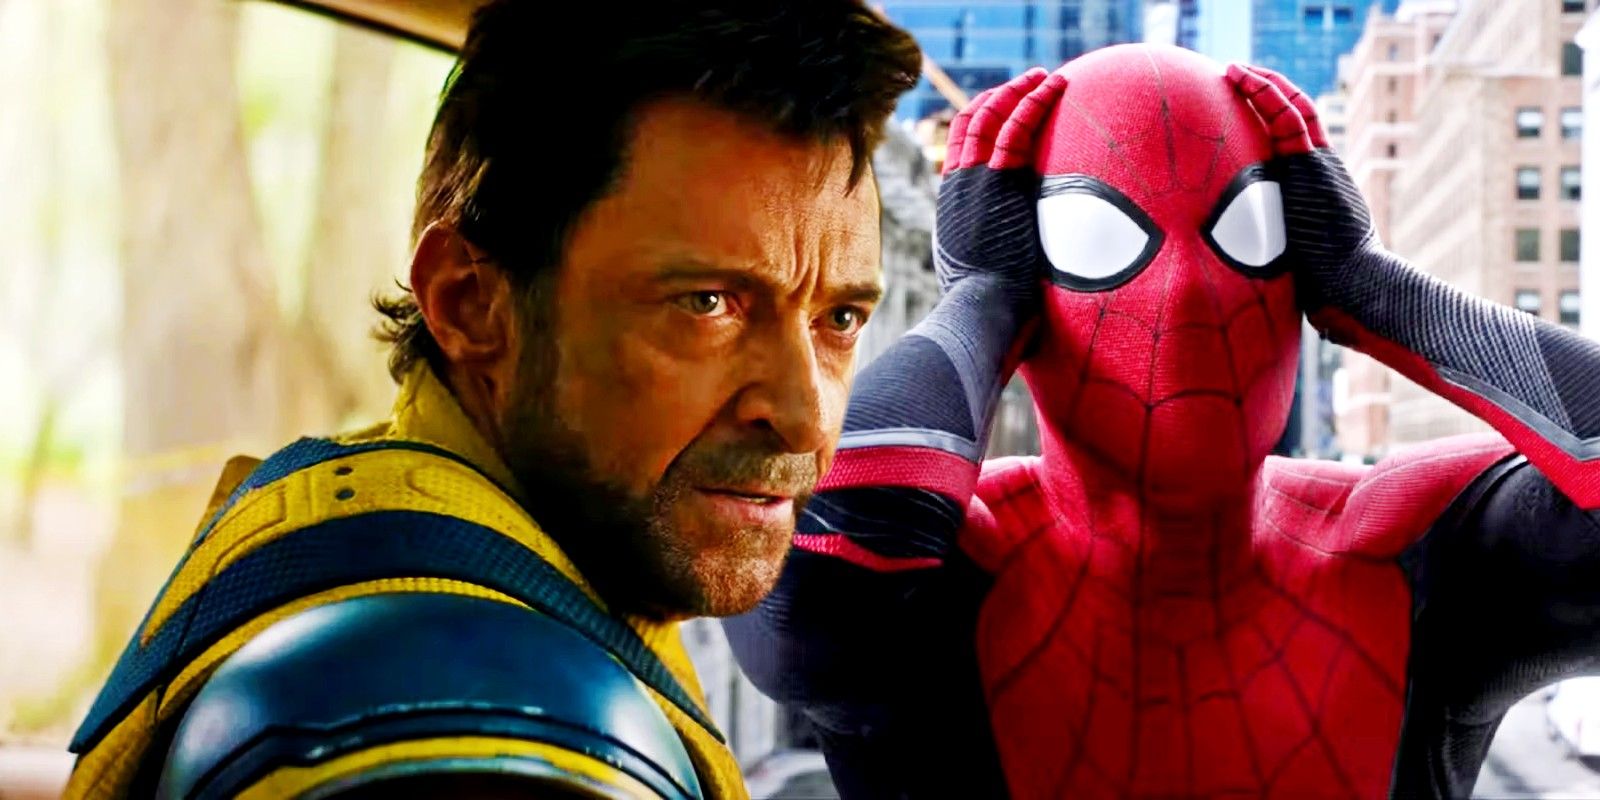 Wolverine in Deadpool & Wolverine next to Spider-Man looking surprised in Far From Home